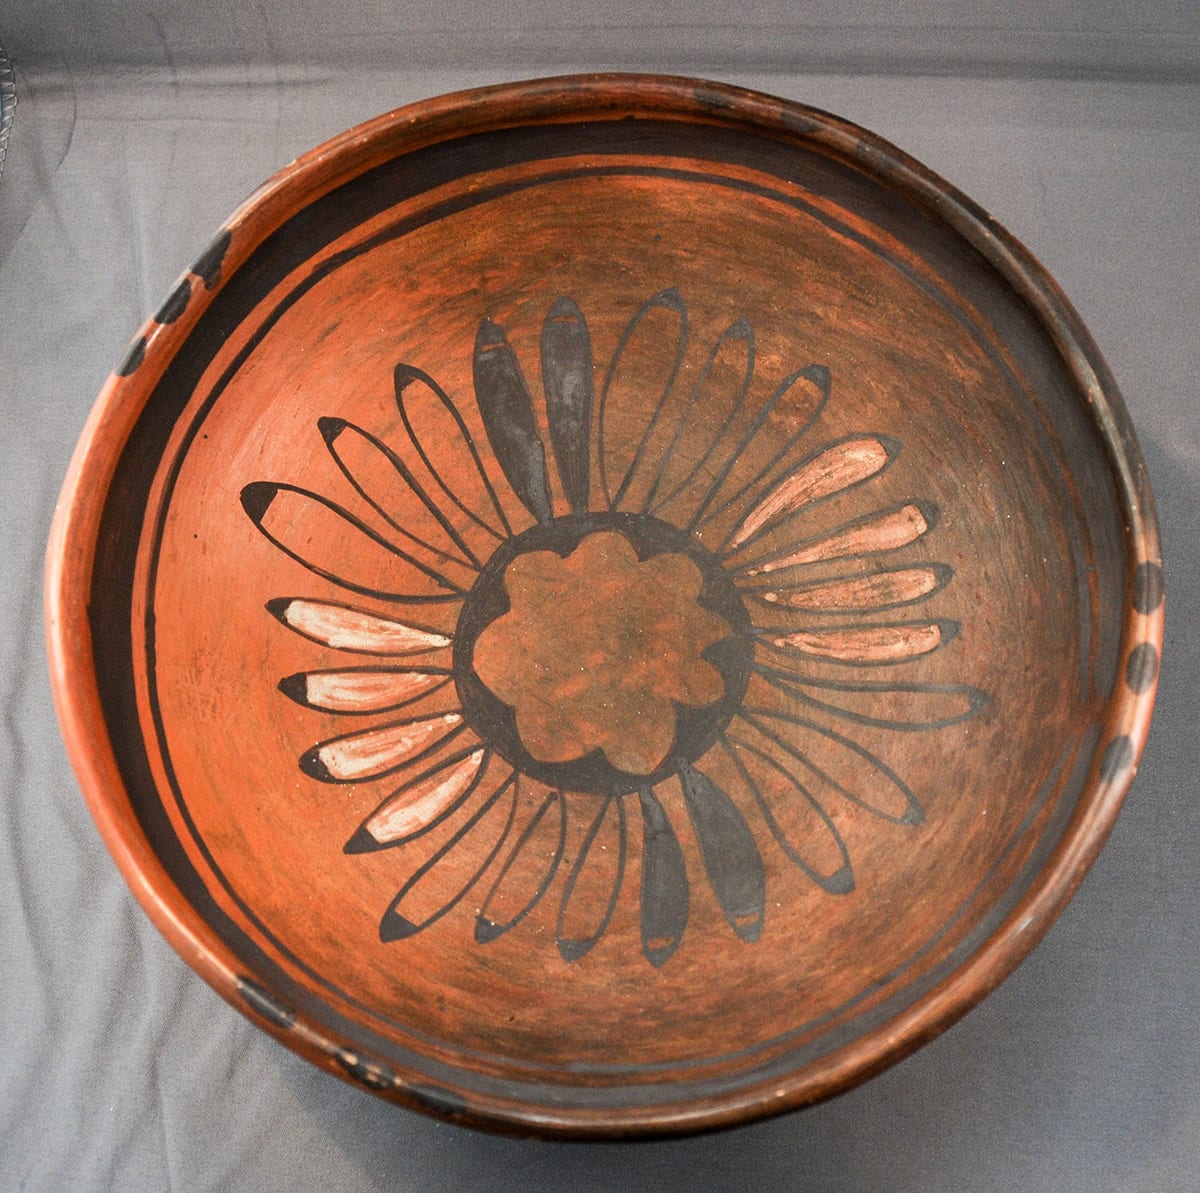 2013-16 Bowl with Feather Shield